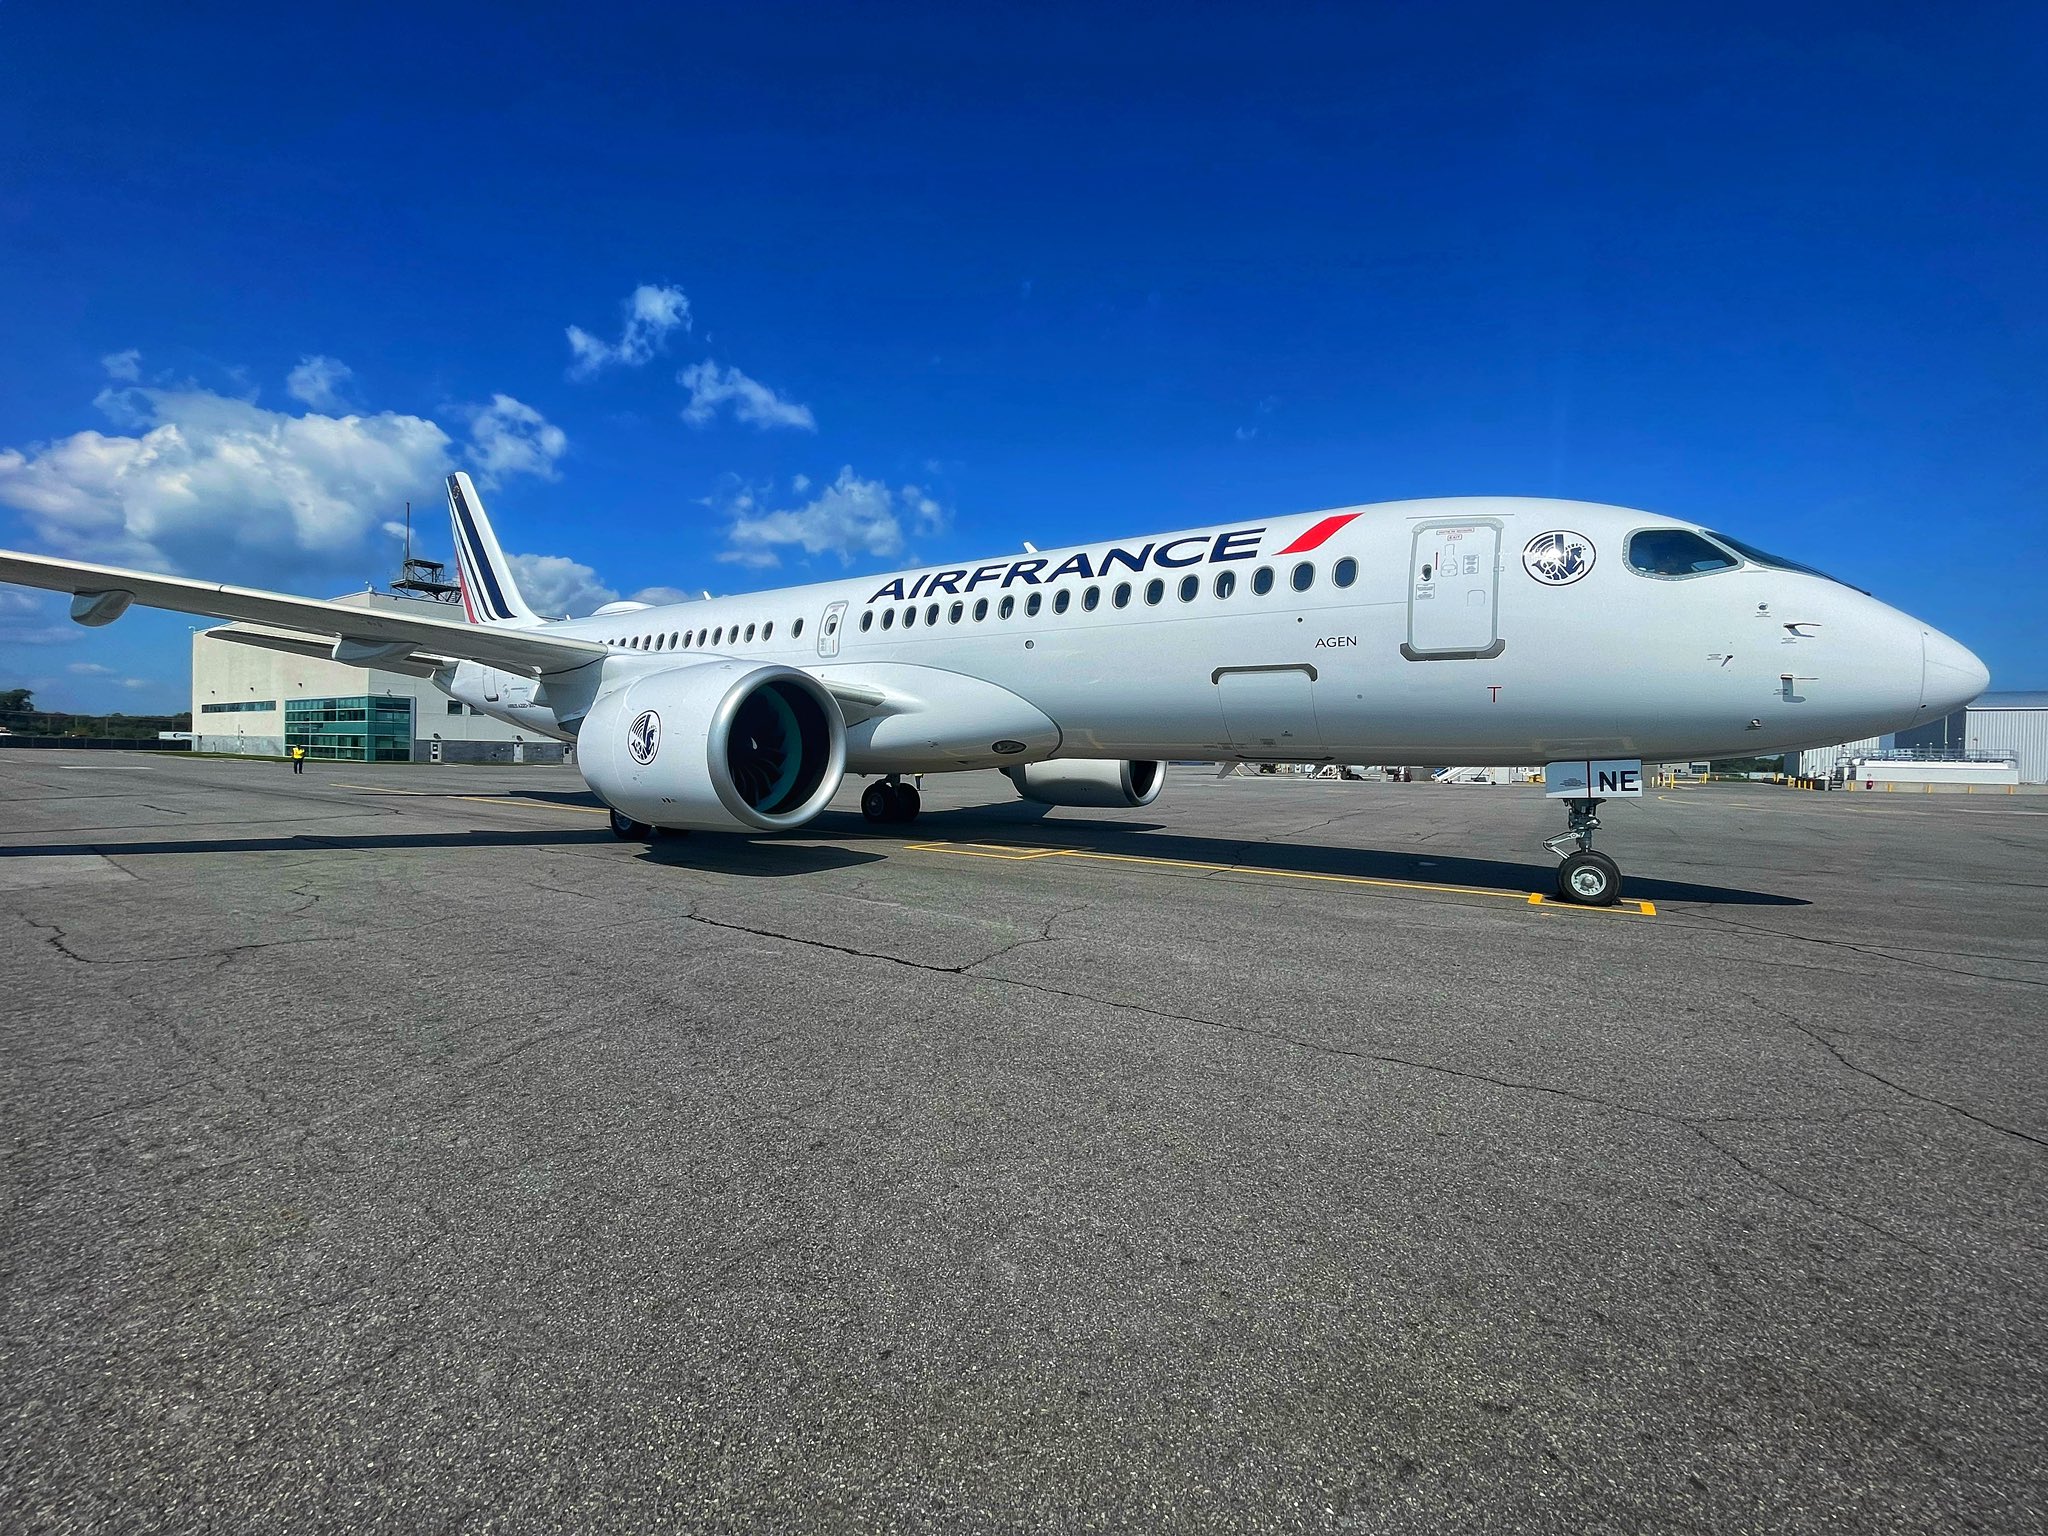 Air France welcomes “Grasse”, its 20th Airbus A220-300